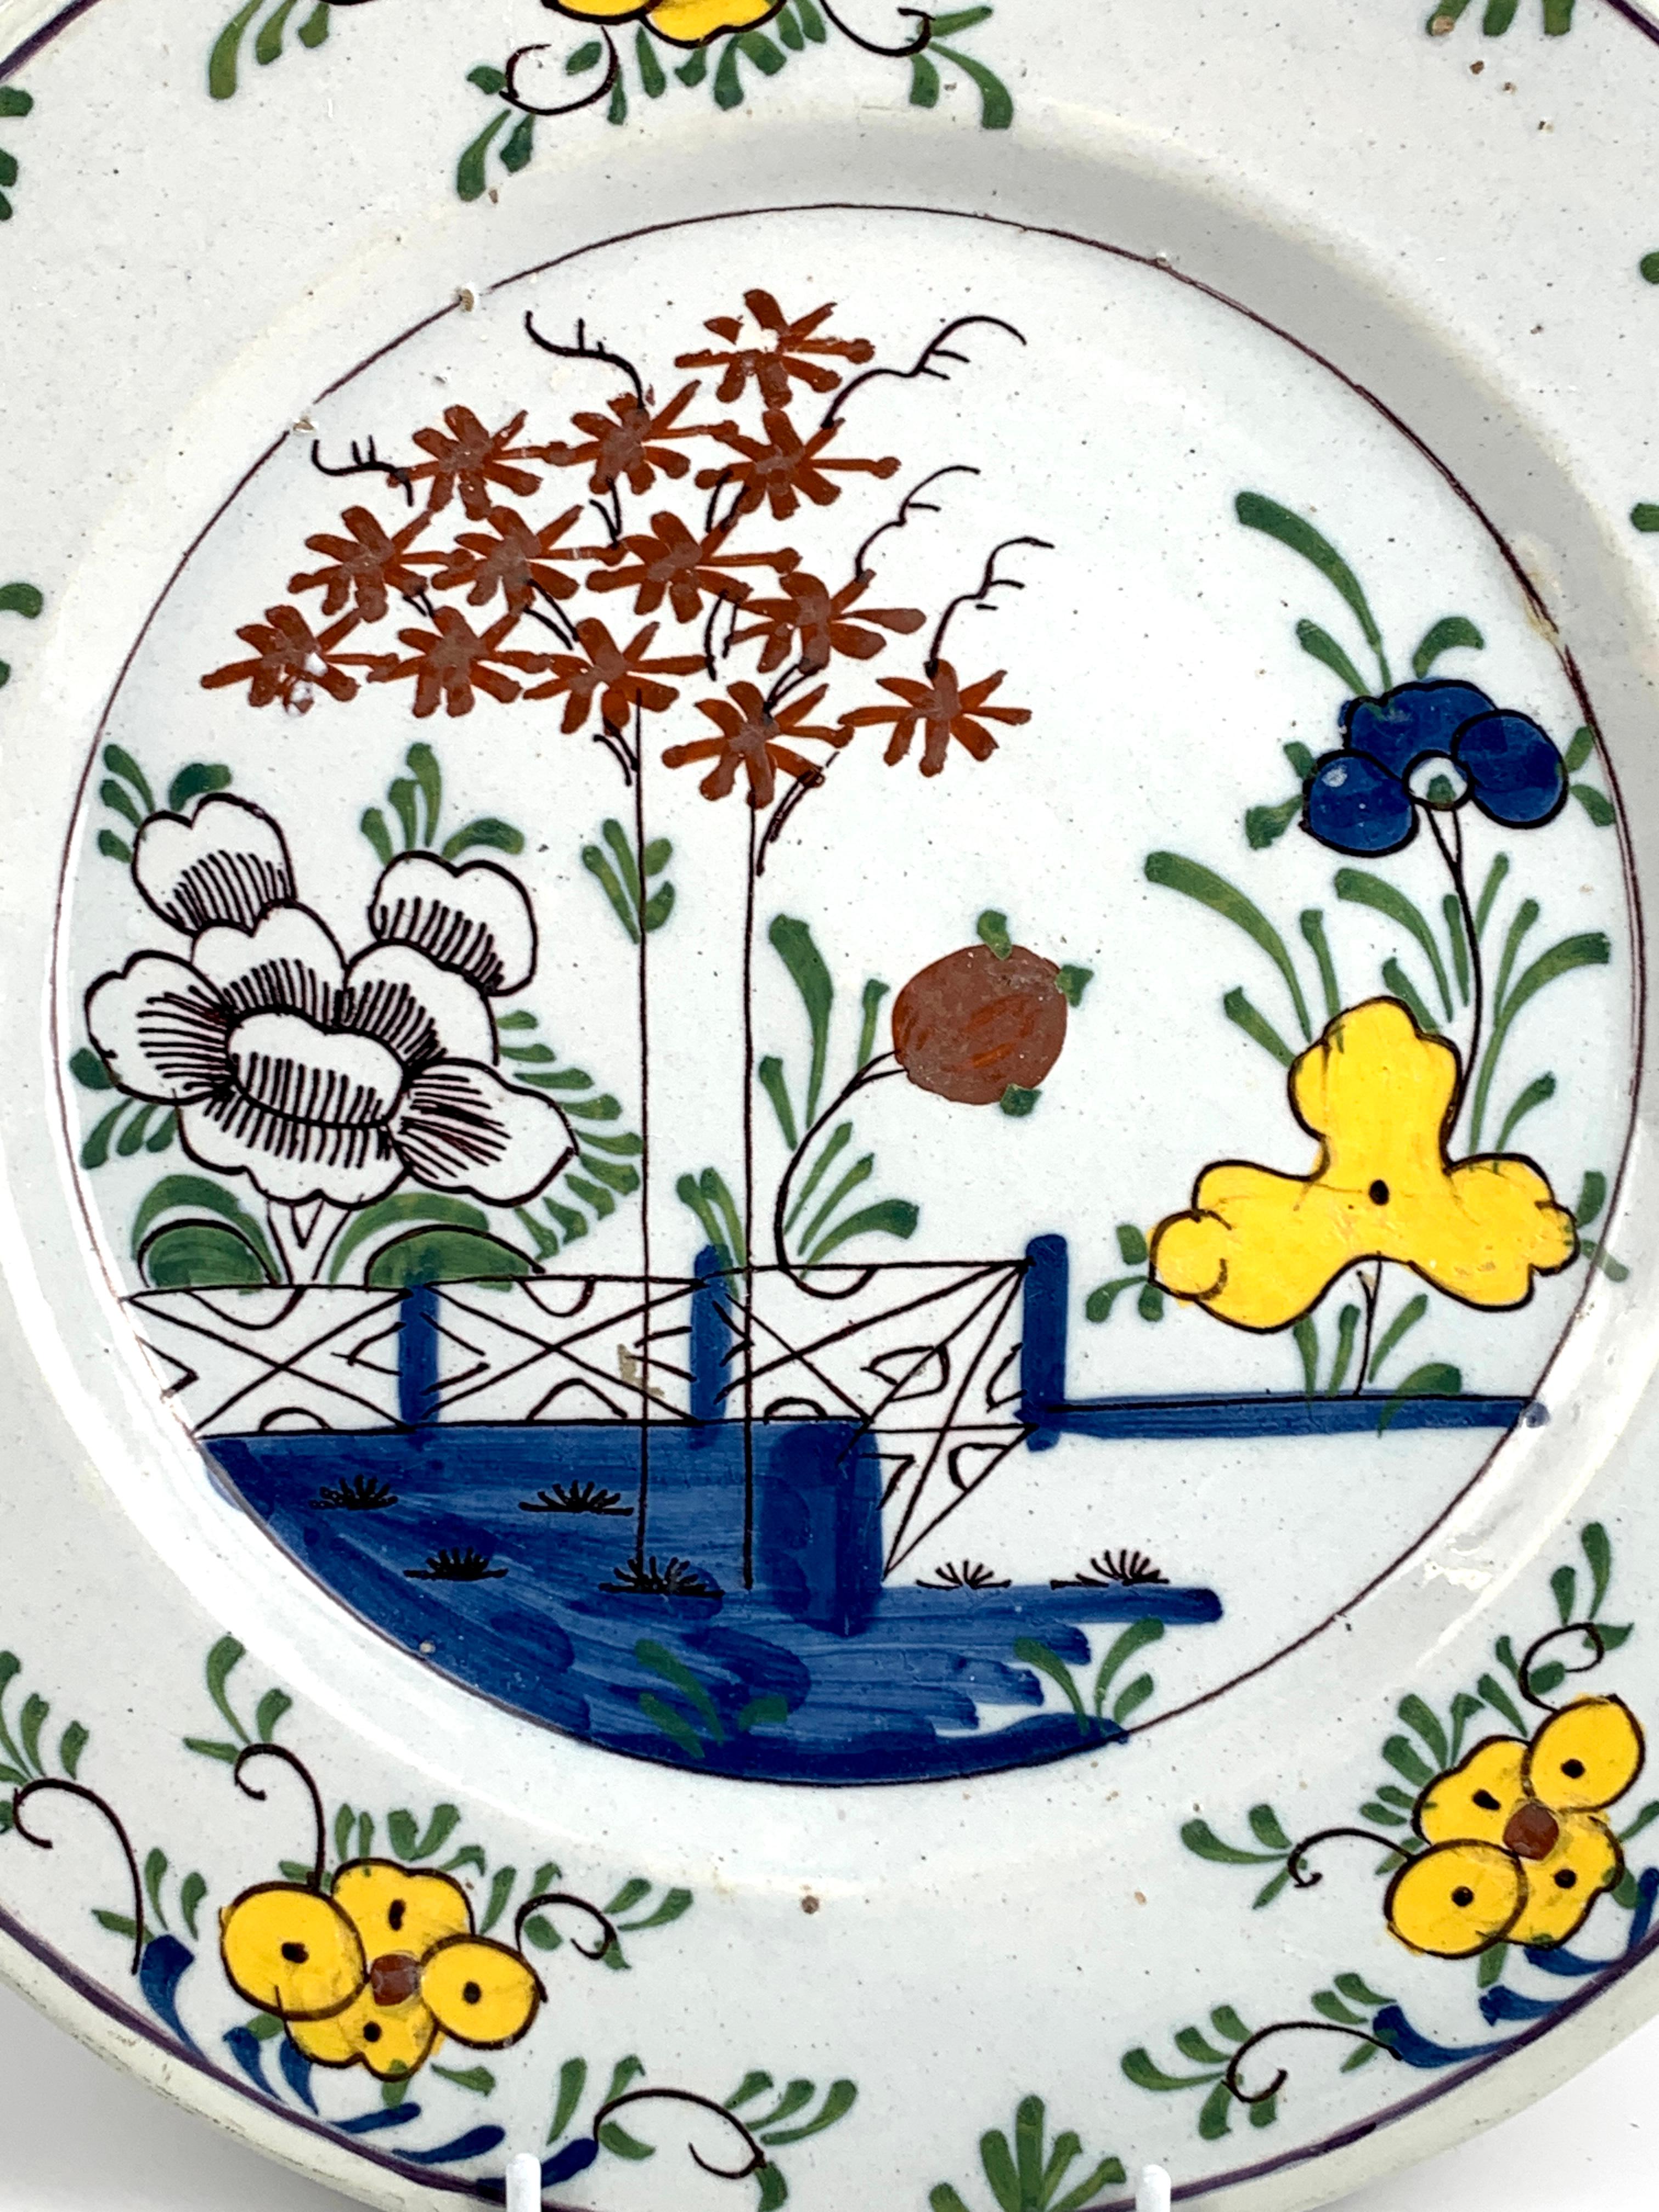 Chinoiserie blue water in the foreground 
This Dutch Delft charger features a hand painted garden scene with large bright yellow flowers, green leaves, small iron red plum blossom flowers, and touches of cobalt blue.
The decoration is simple and